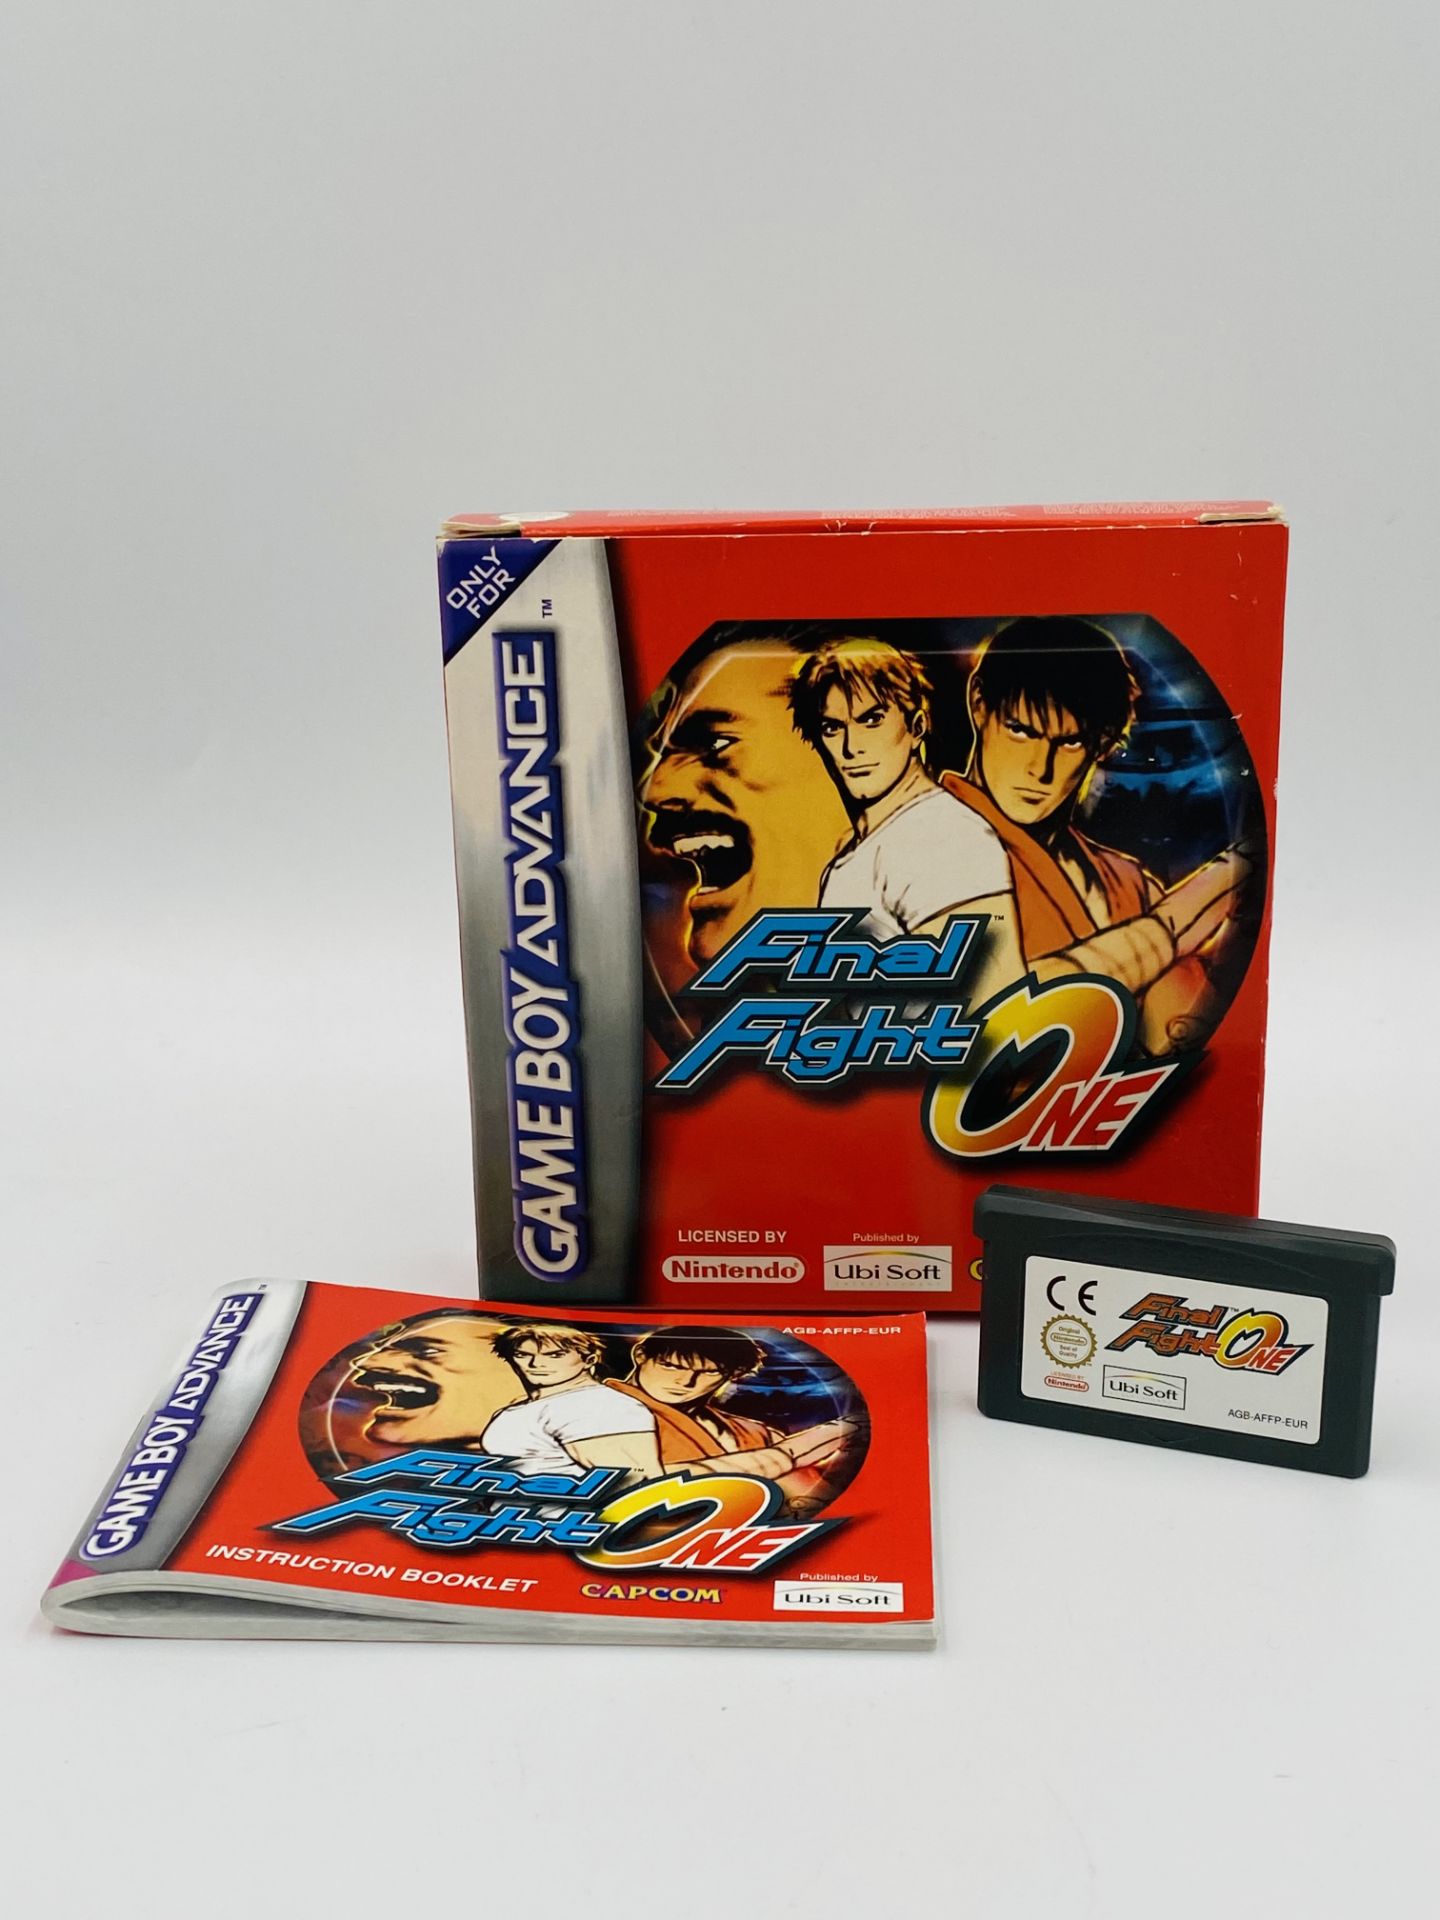 Nintendo Game Boy Advance Final Fight One, boxed - Image 2 of 4